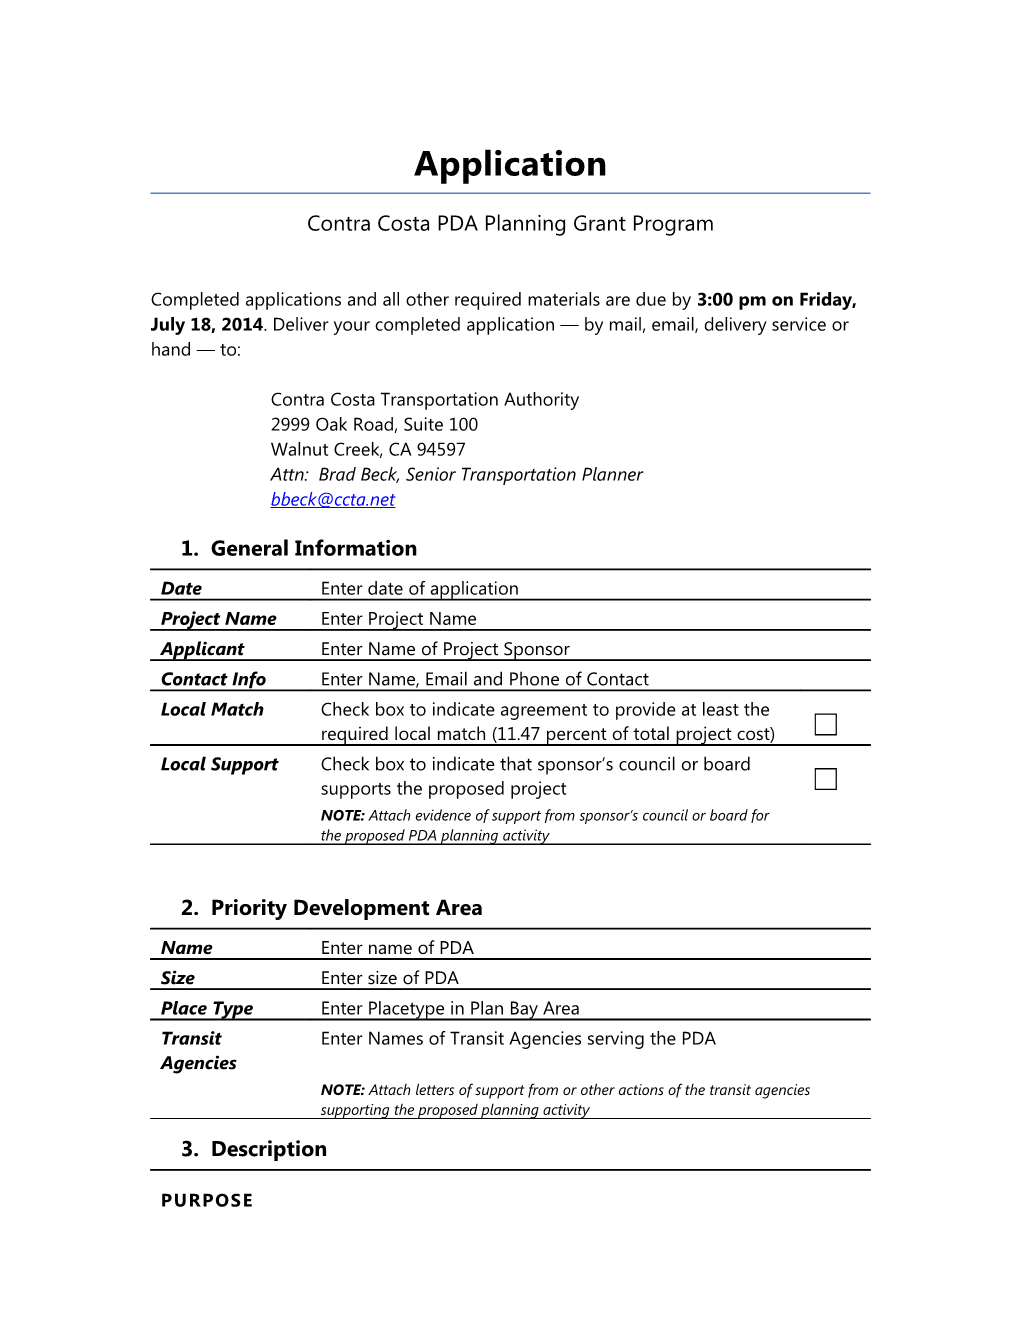 Application for Contra Costa PDA Planning Grant